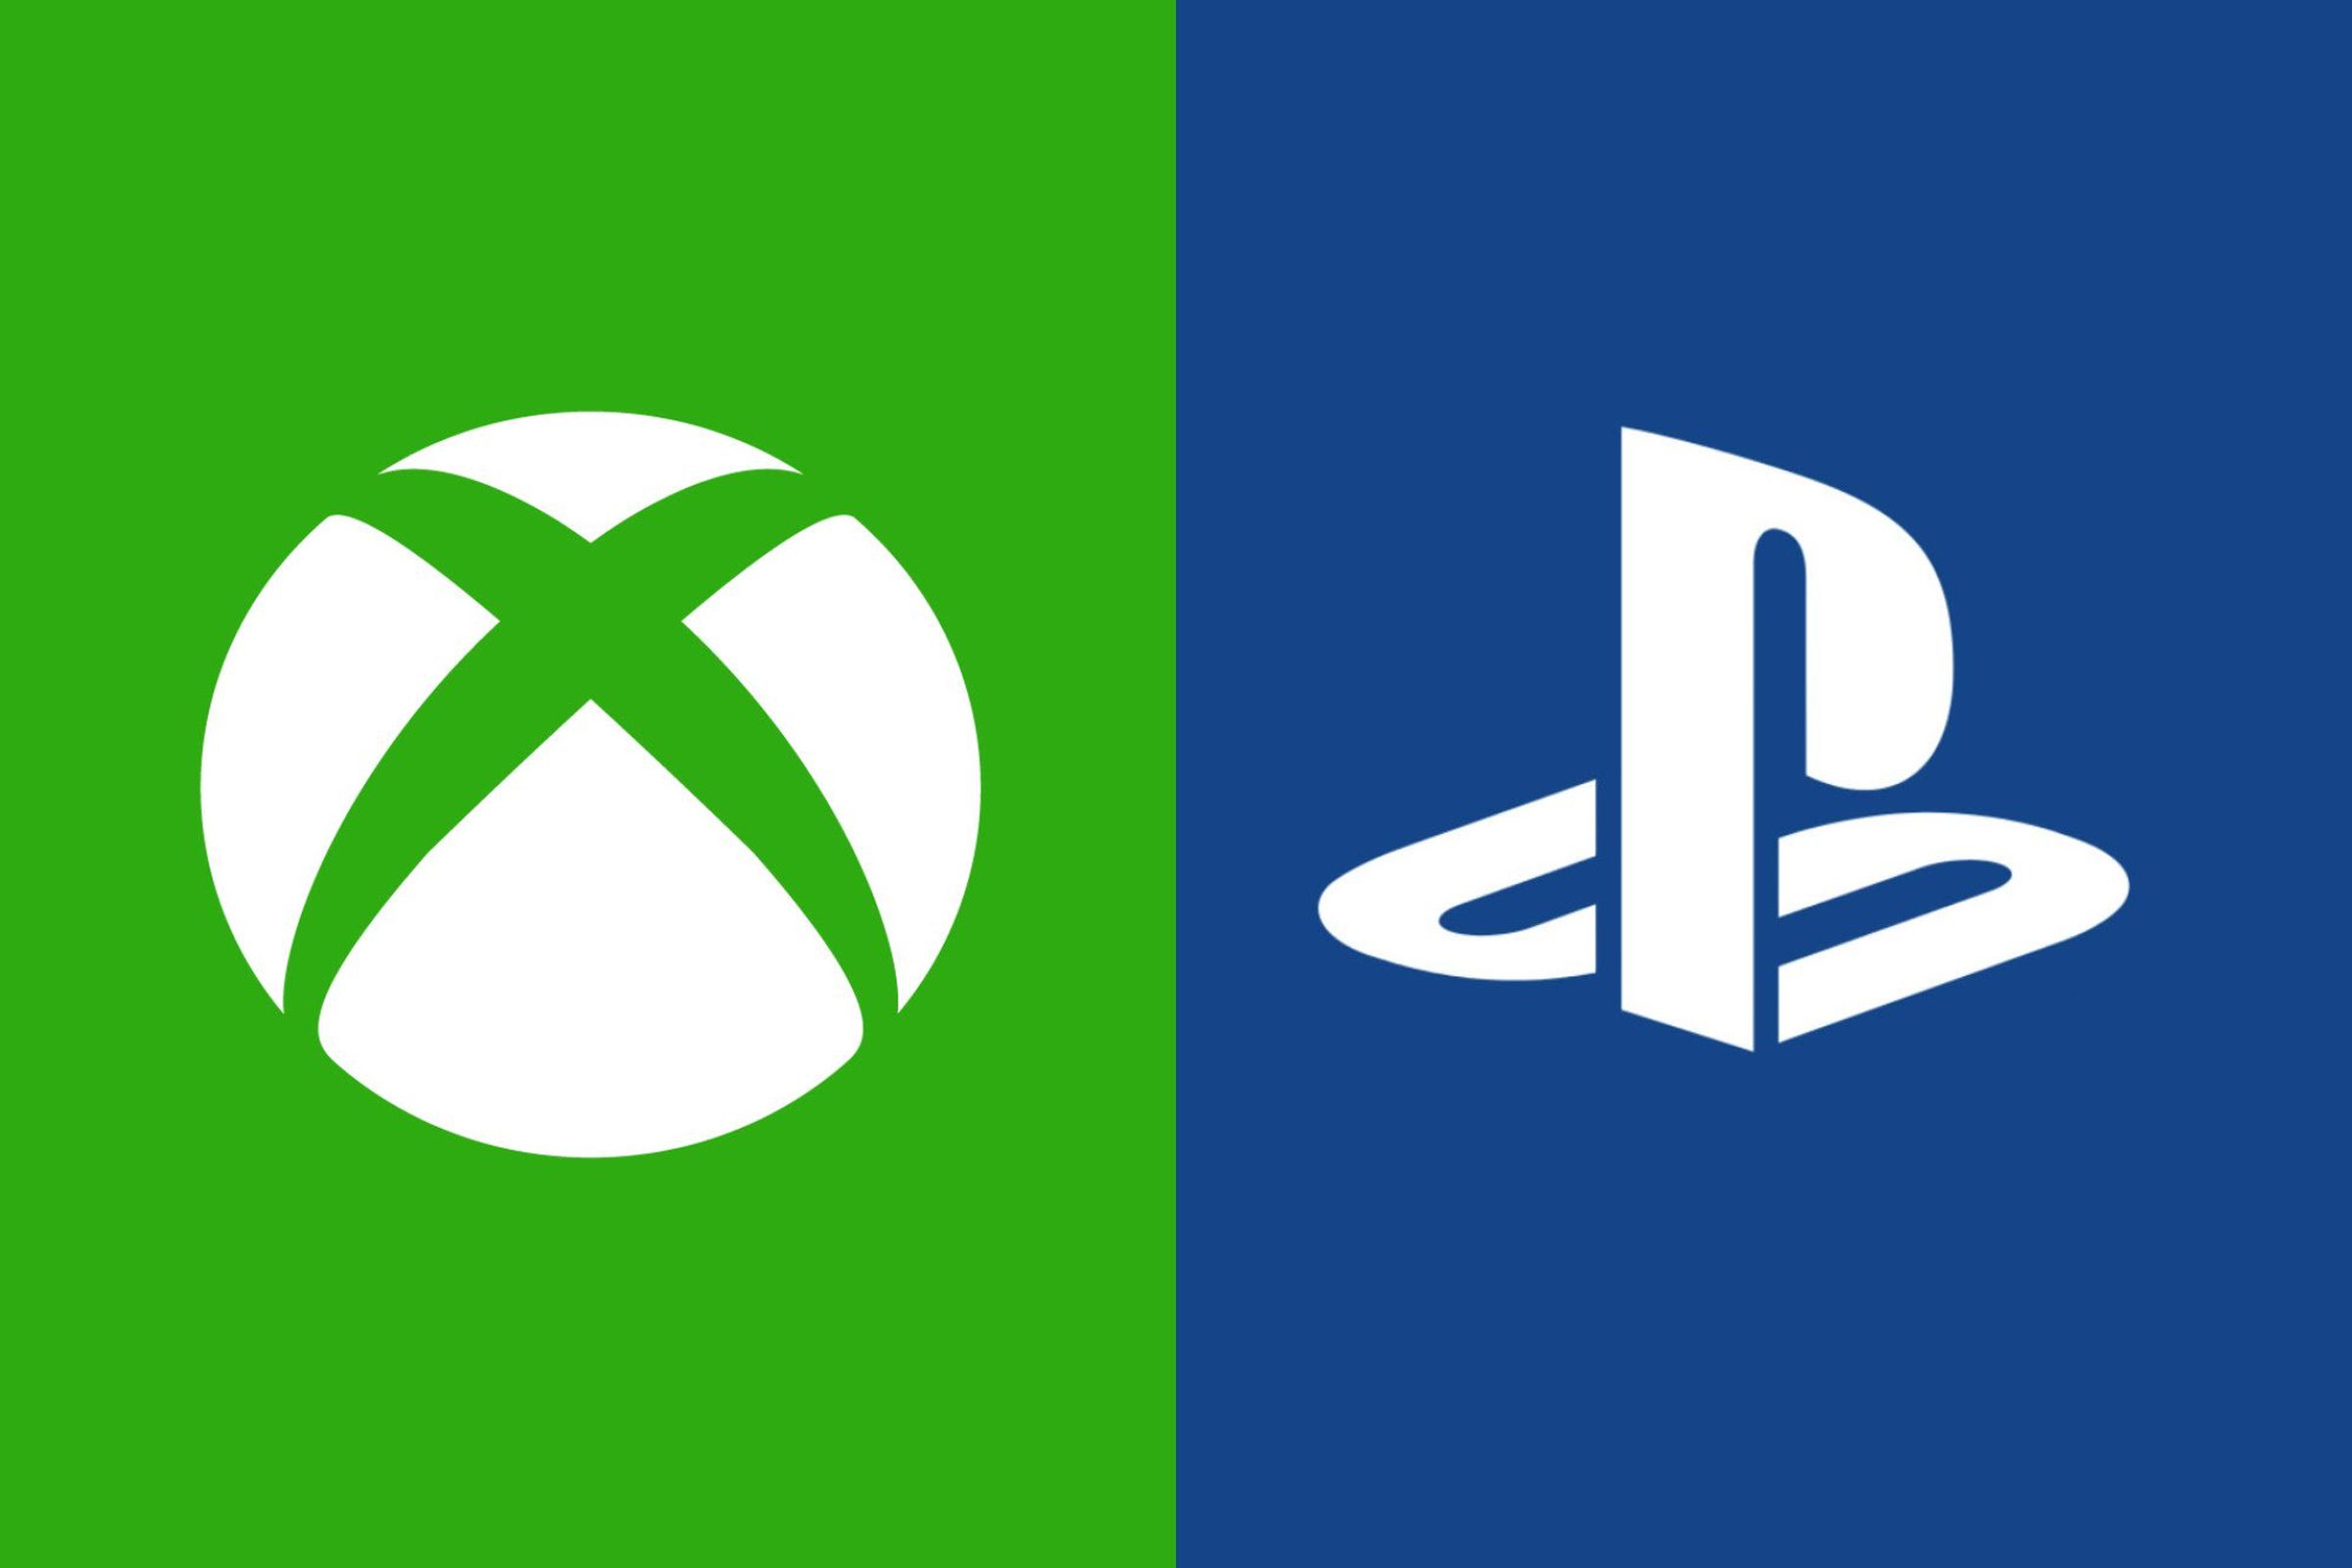 Illustration of Xbox and PlayStation logos